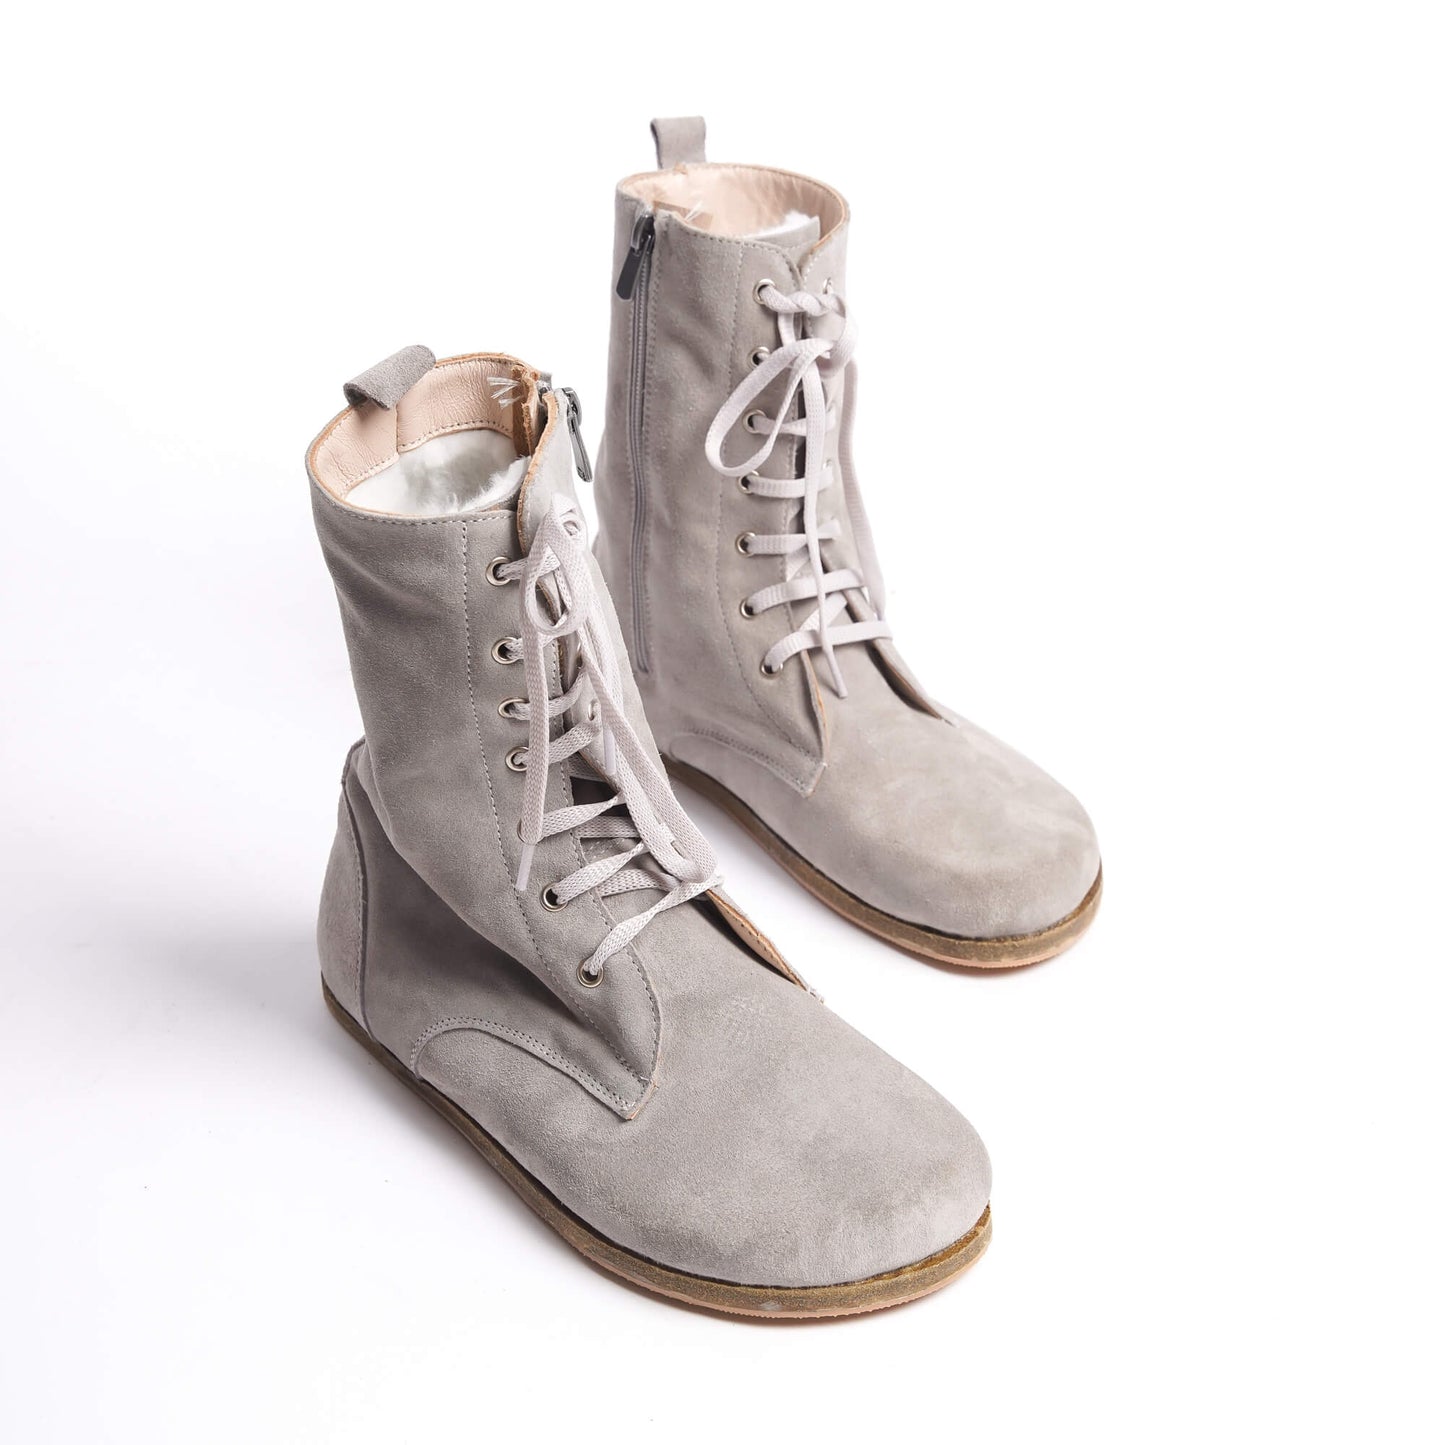 Women’s high ankle lace-up boots made from genuine gray suede leather.